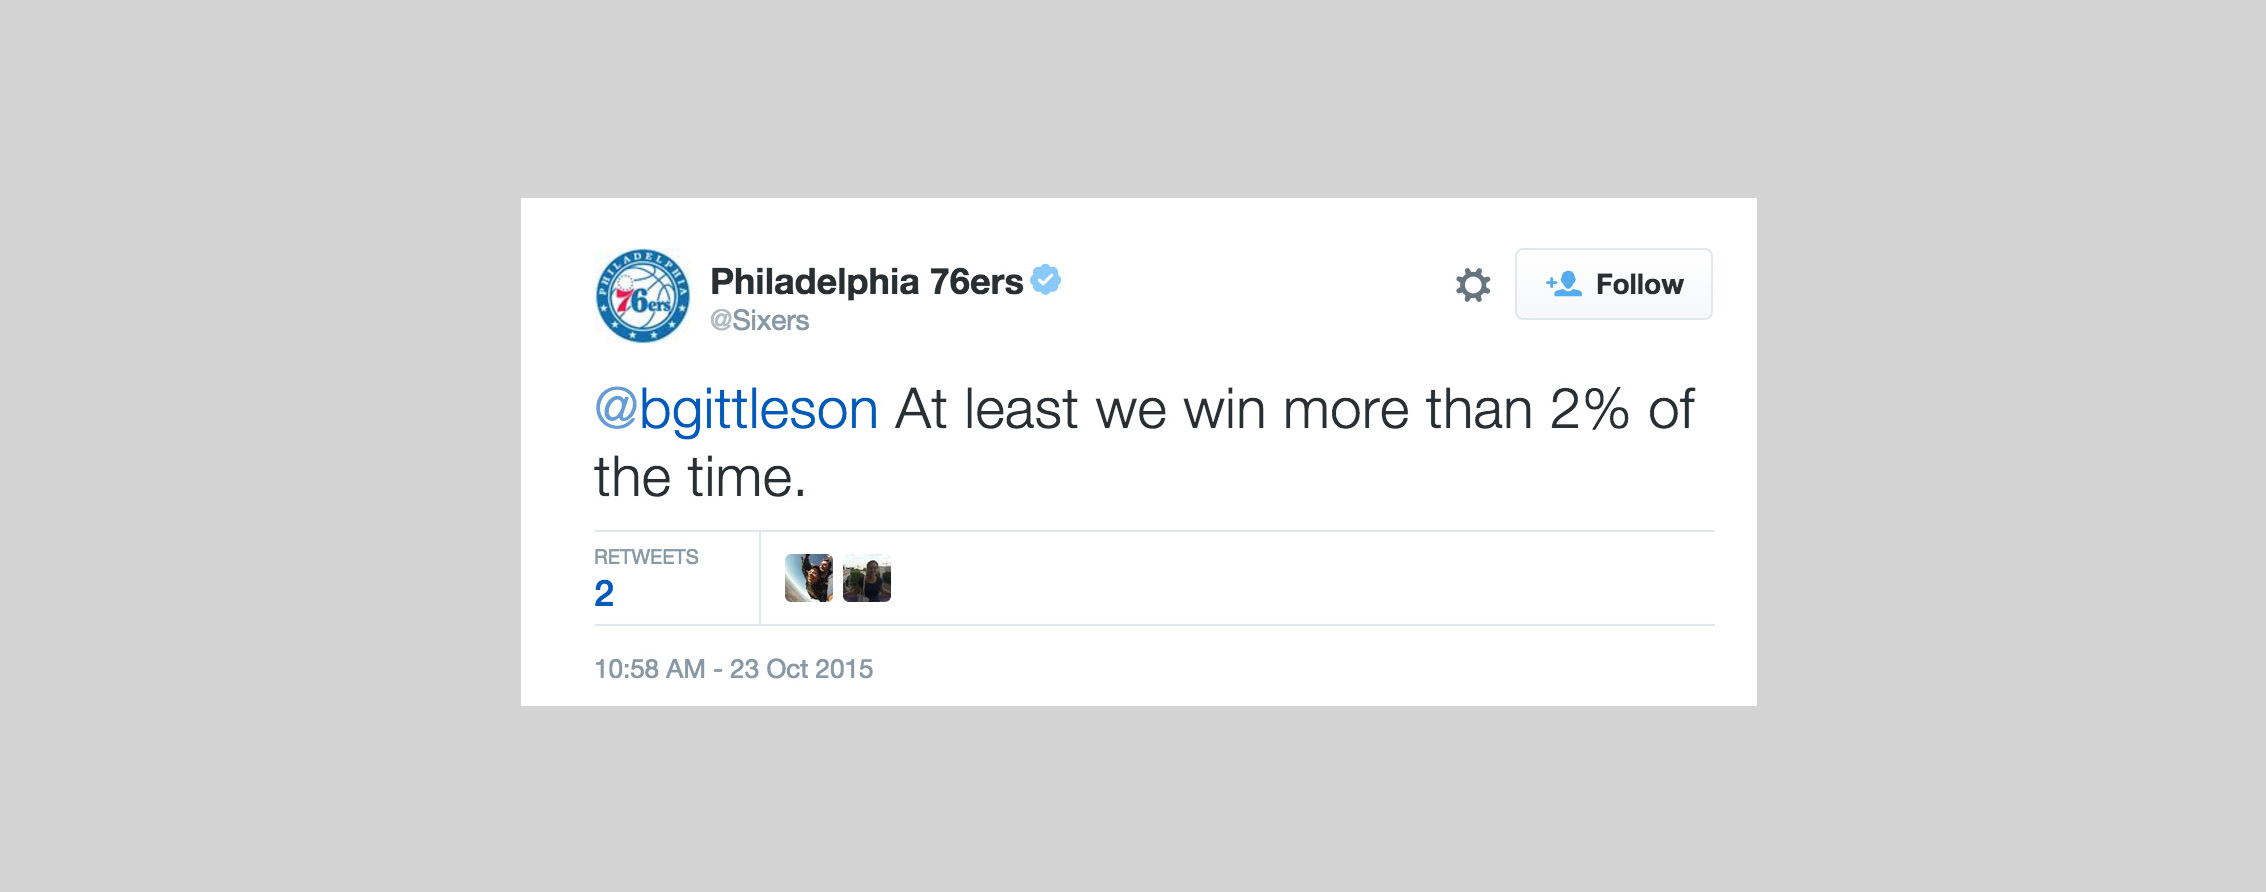 PHOTO: Tweet posted by Philadelphia 76ers Twitter account on Oct. 23, 2015.